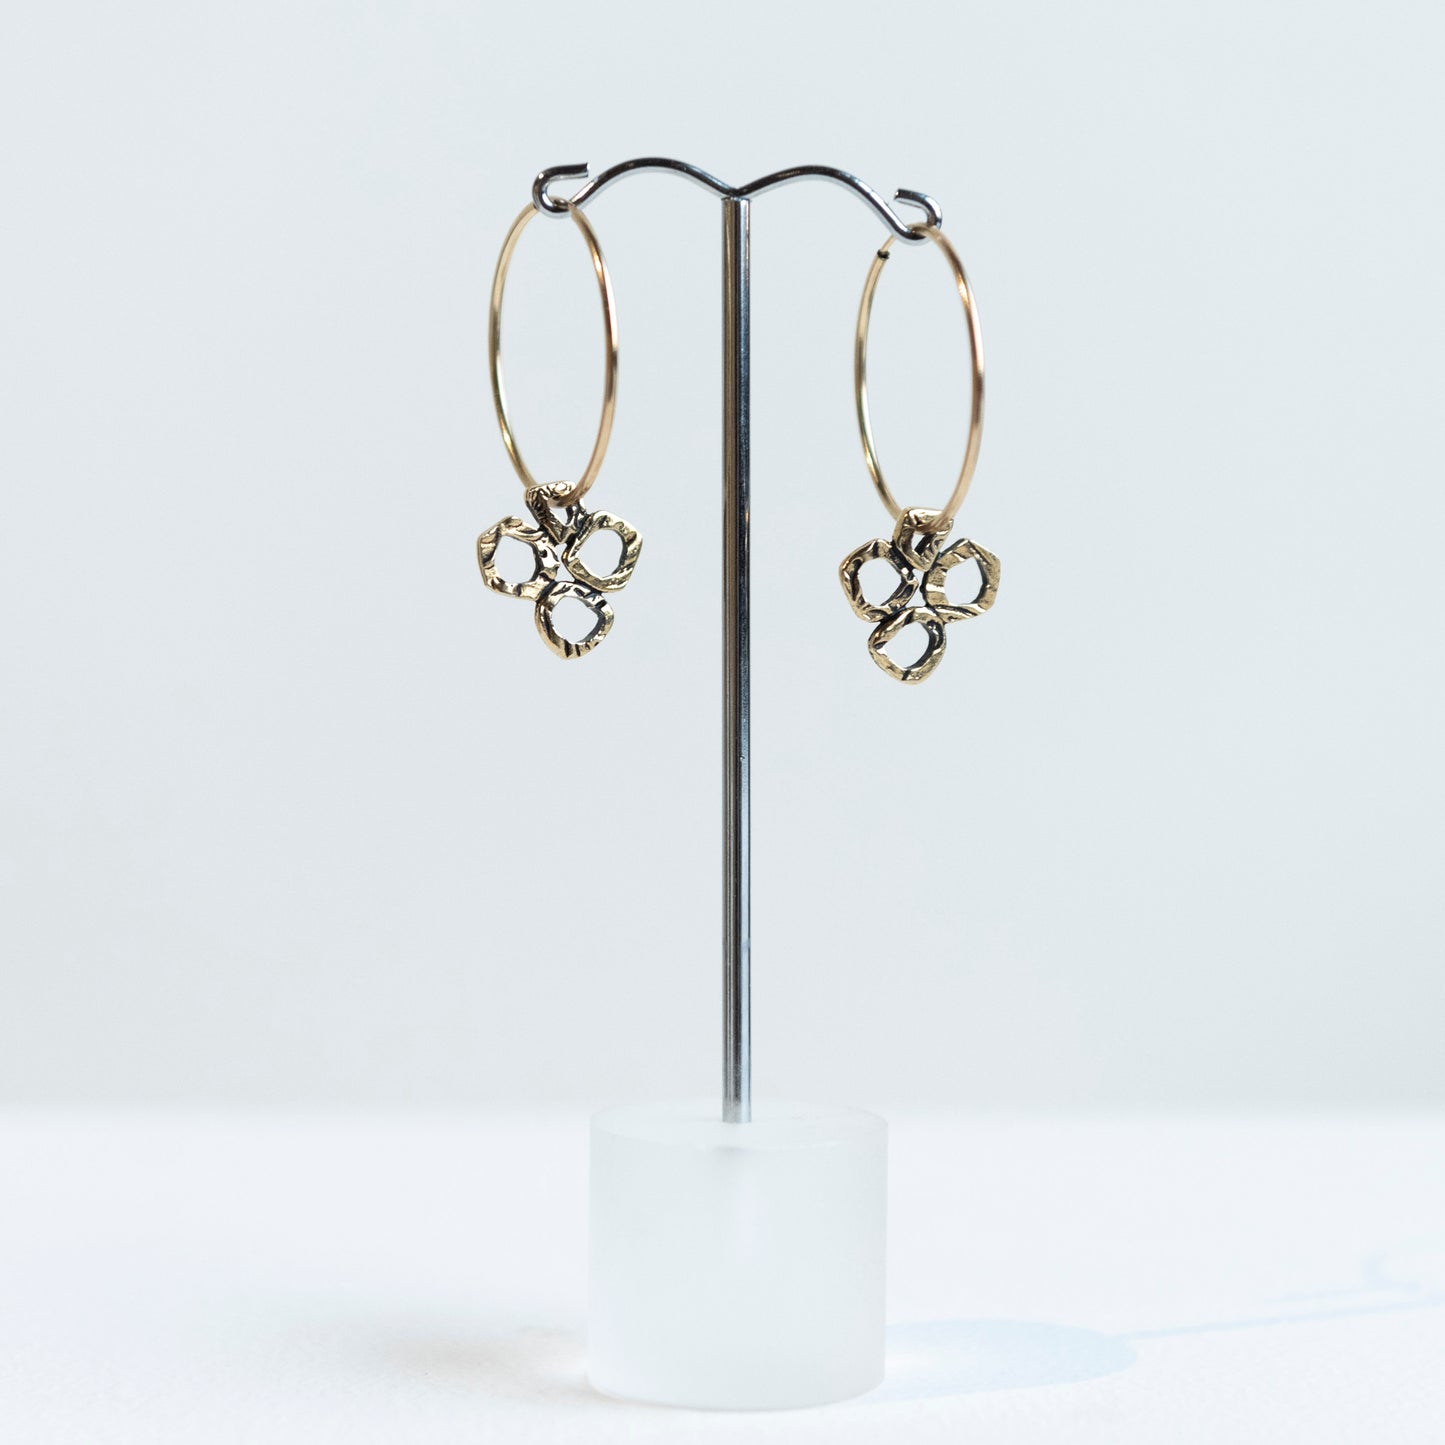 Brenda Wong, Gold Hoops with Clover Charms